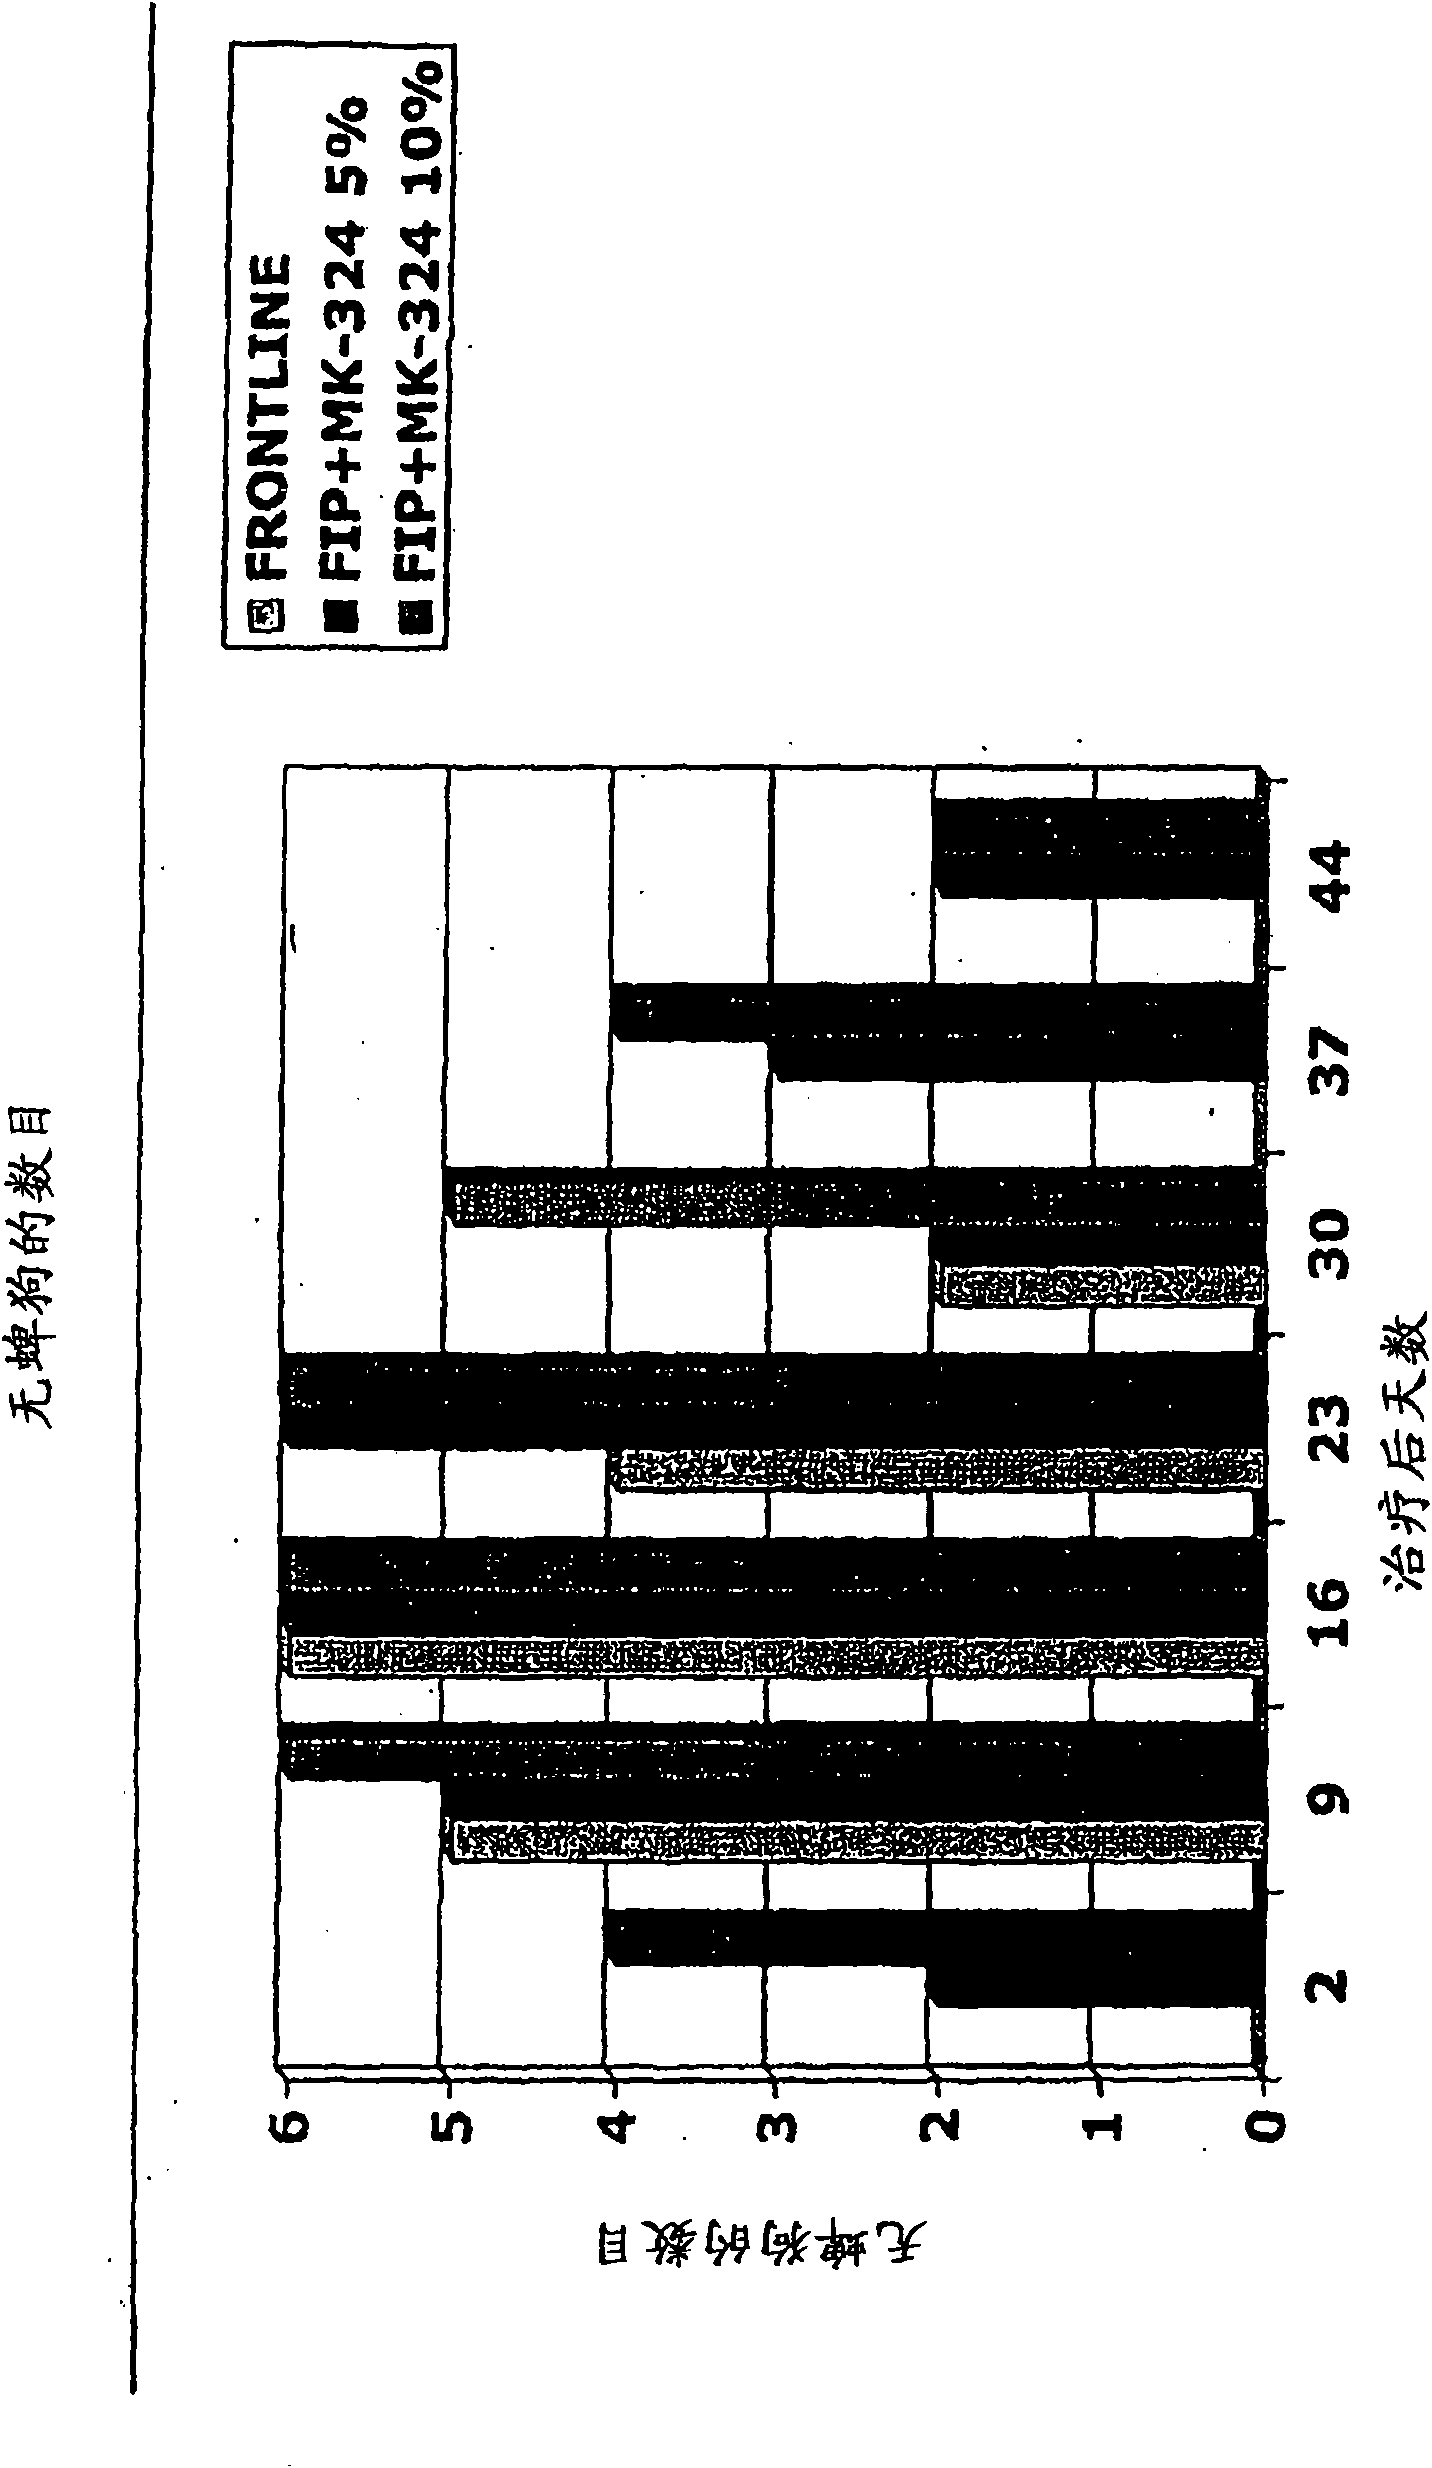 Compositions comprising c-13 alkoxyether macrolide compounds and phenylpyrazole compounds